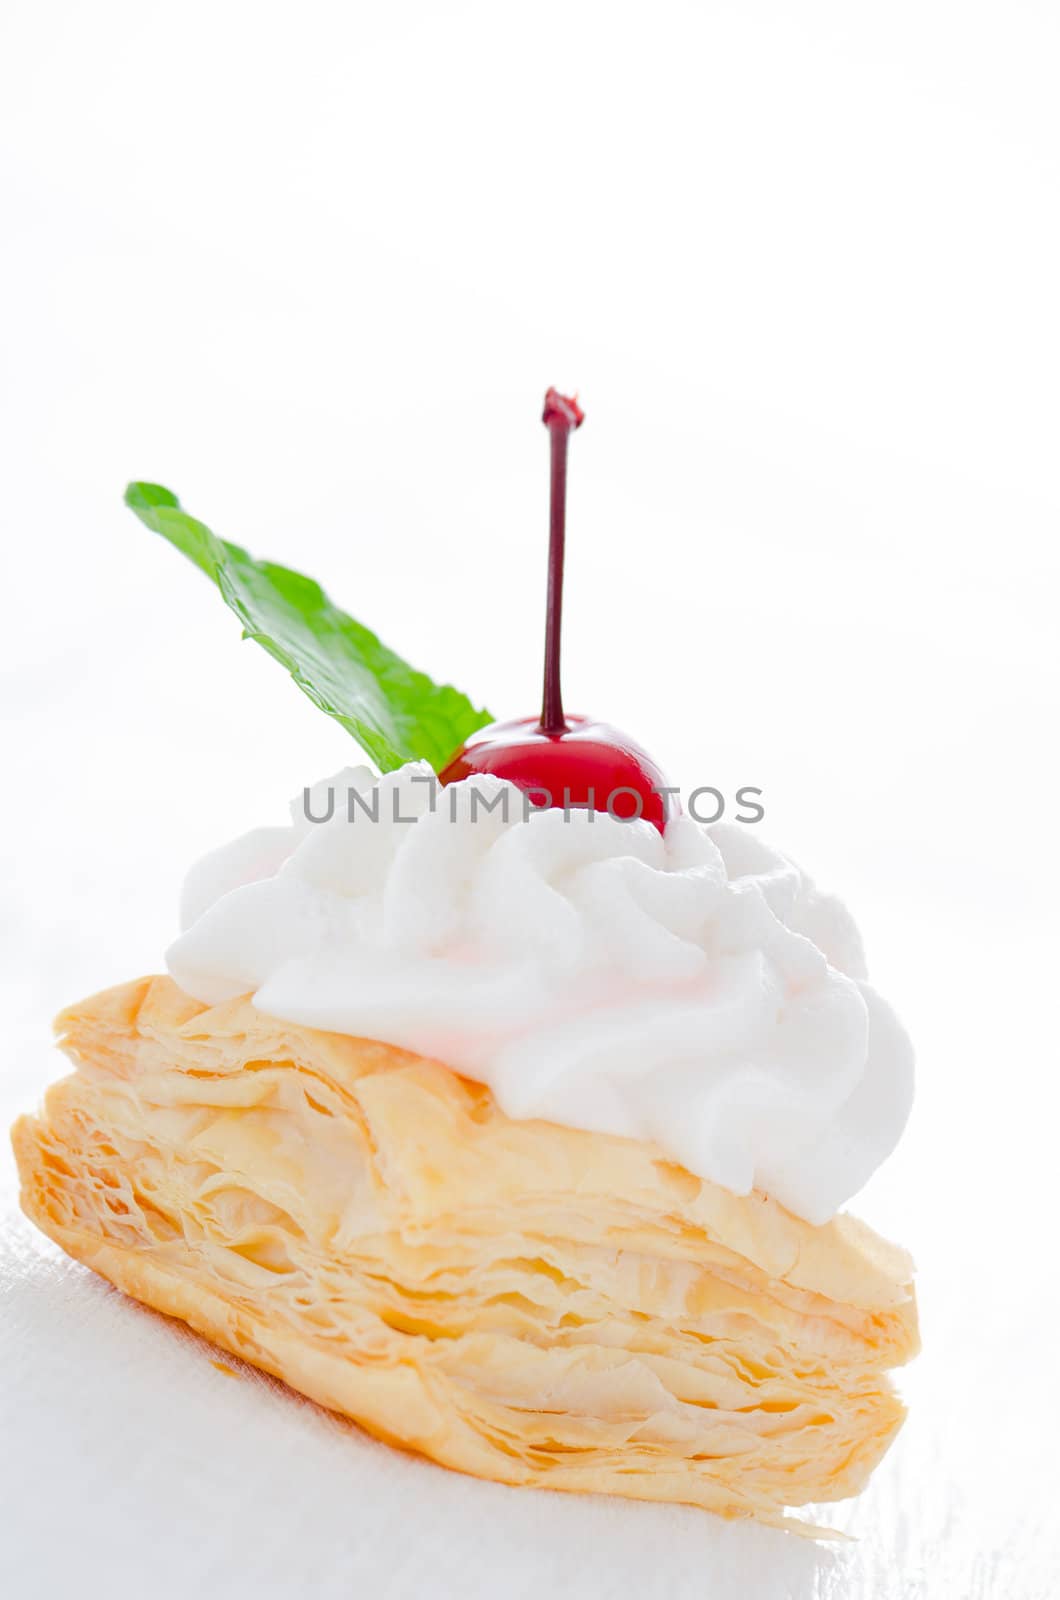 puff pastry cake with cream cherry and fresh mint leaf on white plate